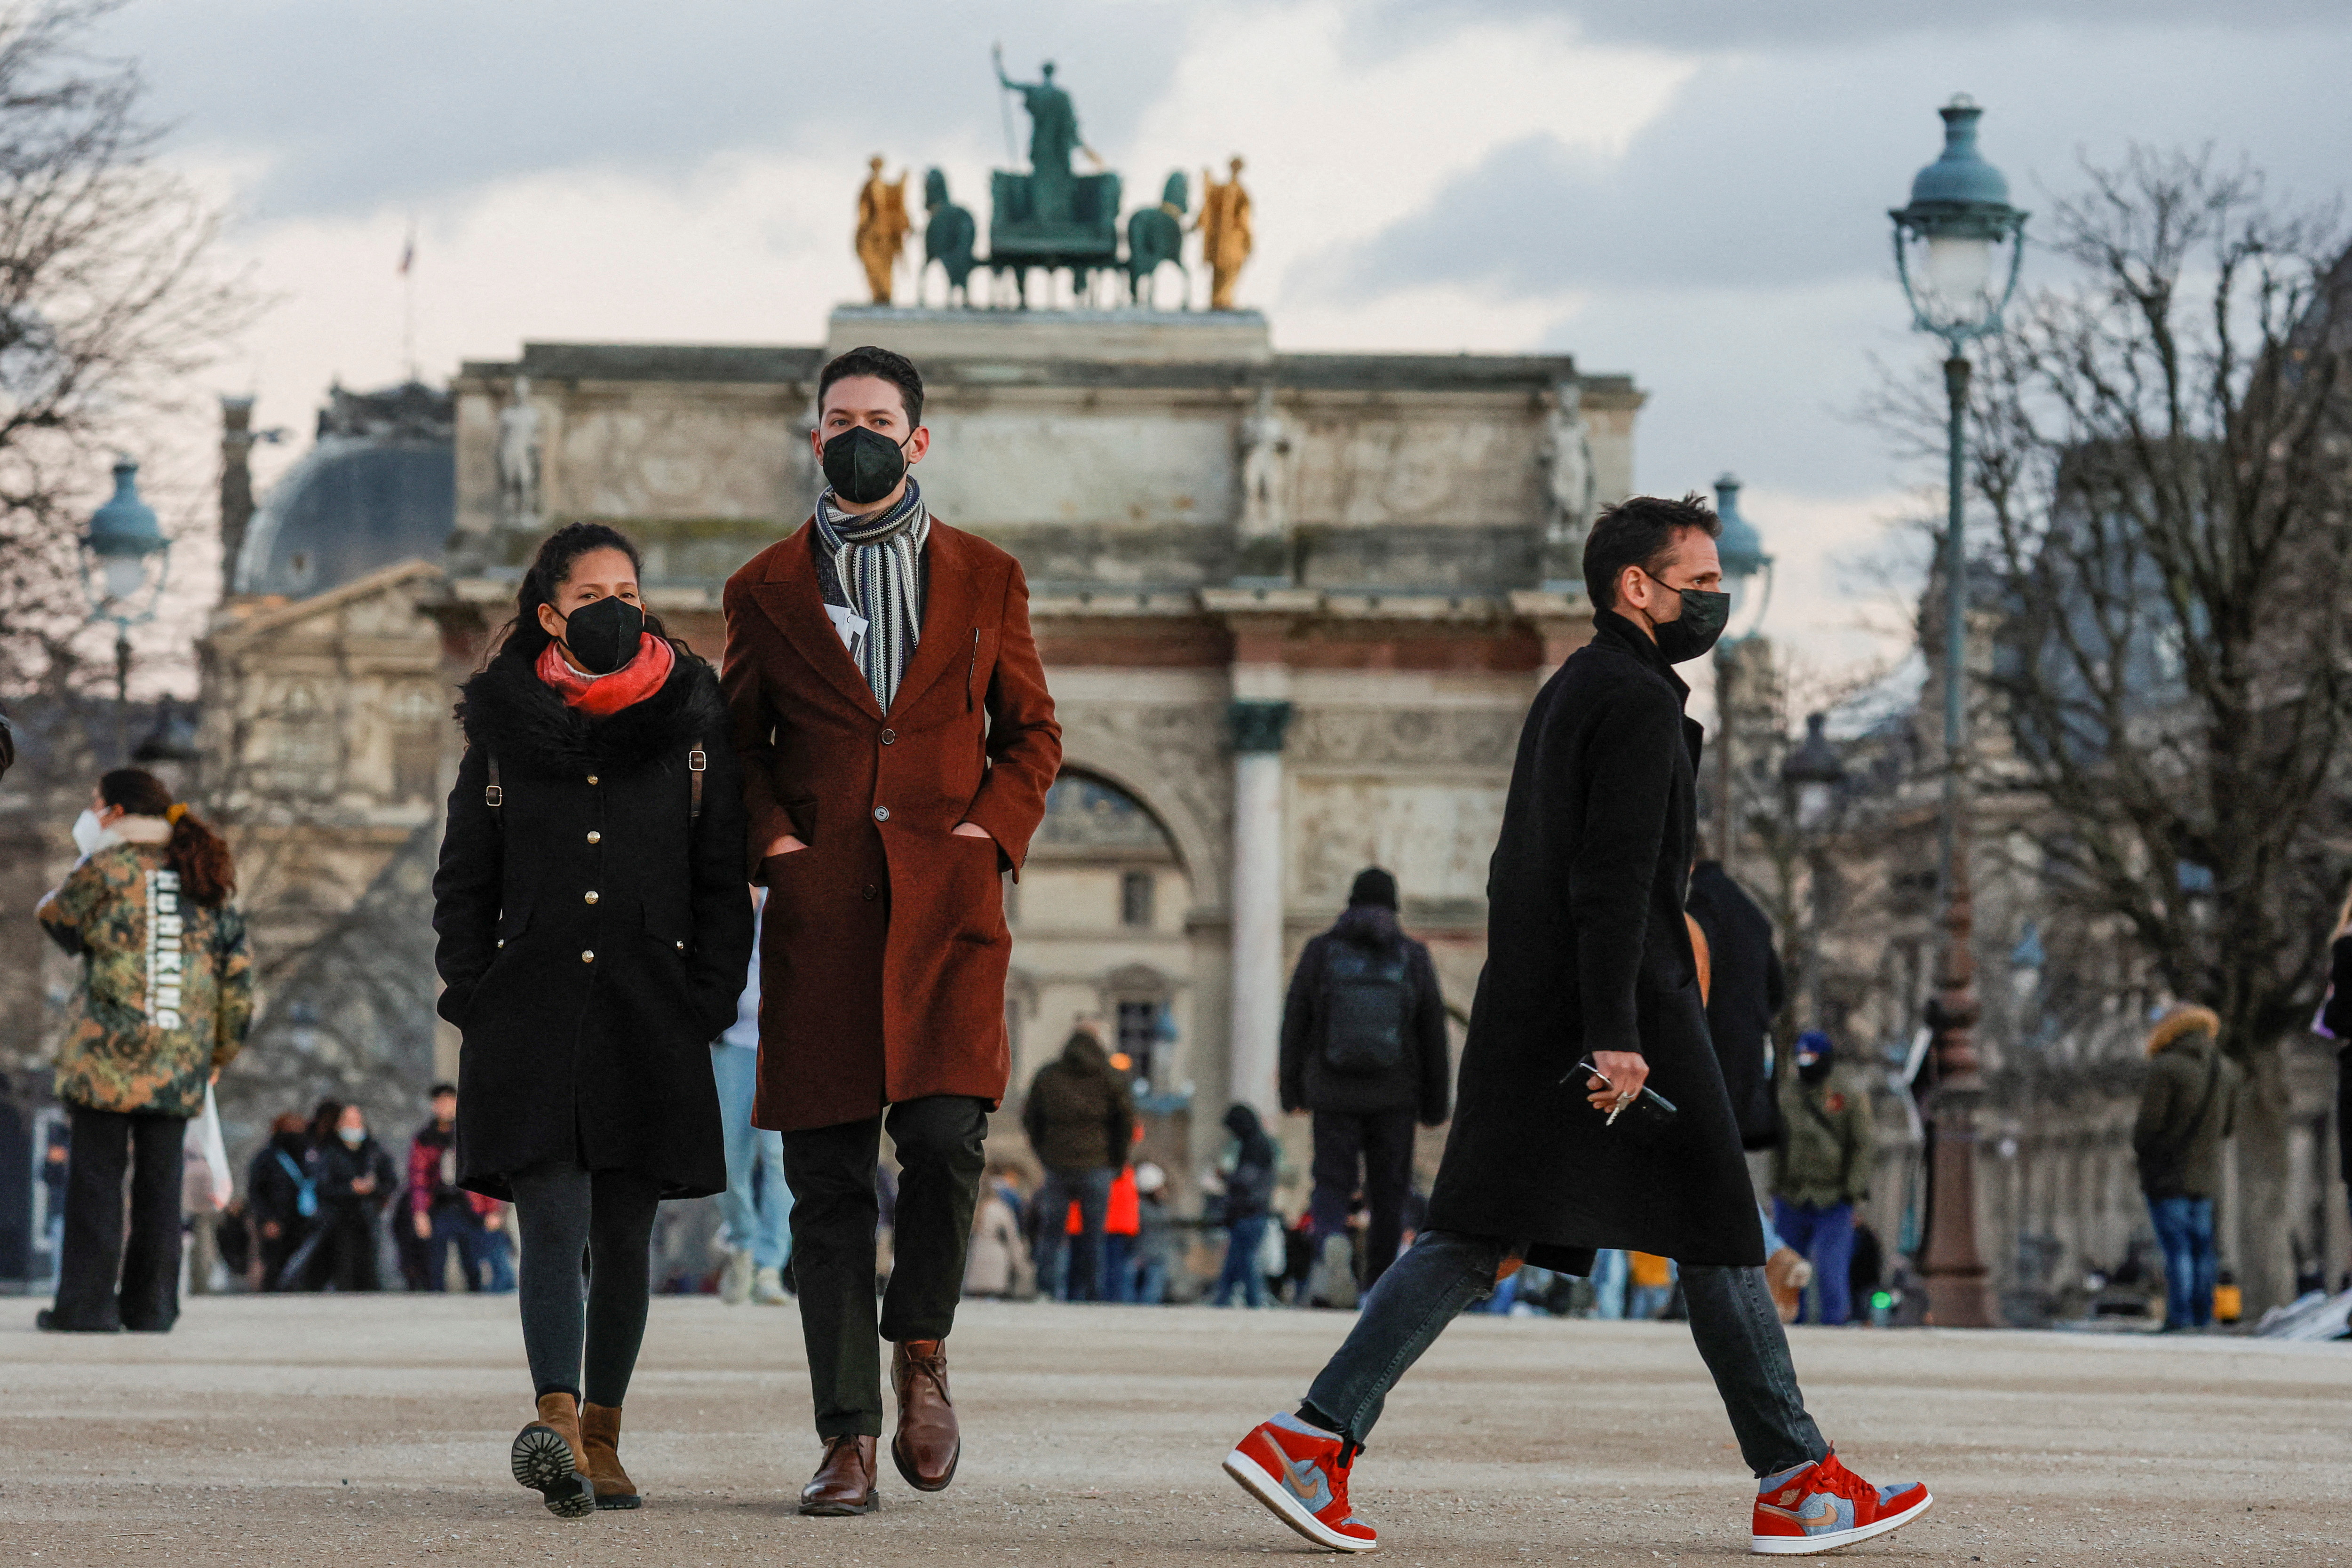 People wearing protective face masks walk in the Tuileries Gardens in Paris amid the coronavirus disease (COVID-19) outbreak in France, January 5, 2022. REUTERS/Gonzalo Fuentes